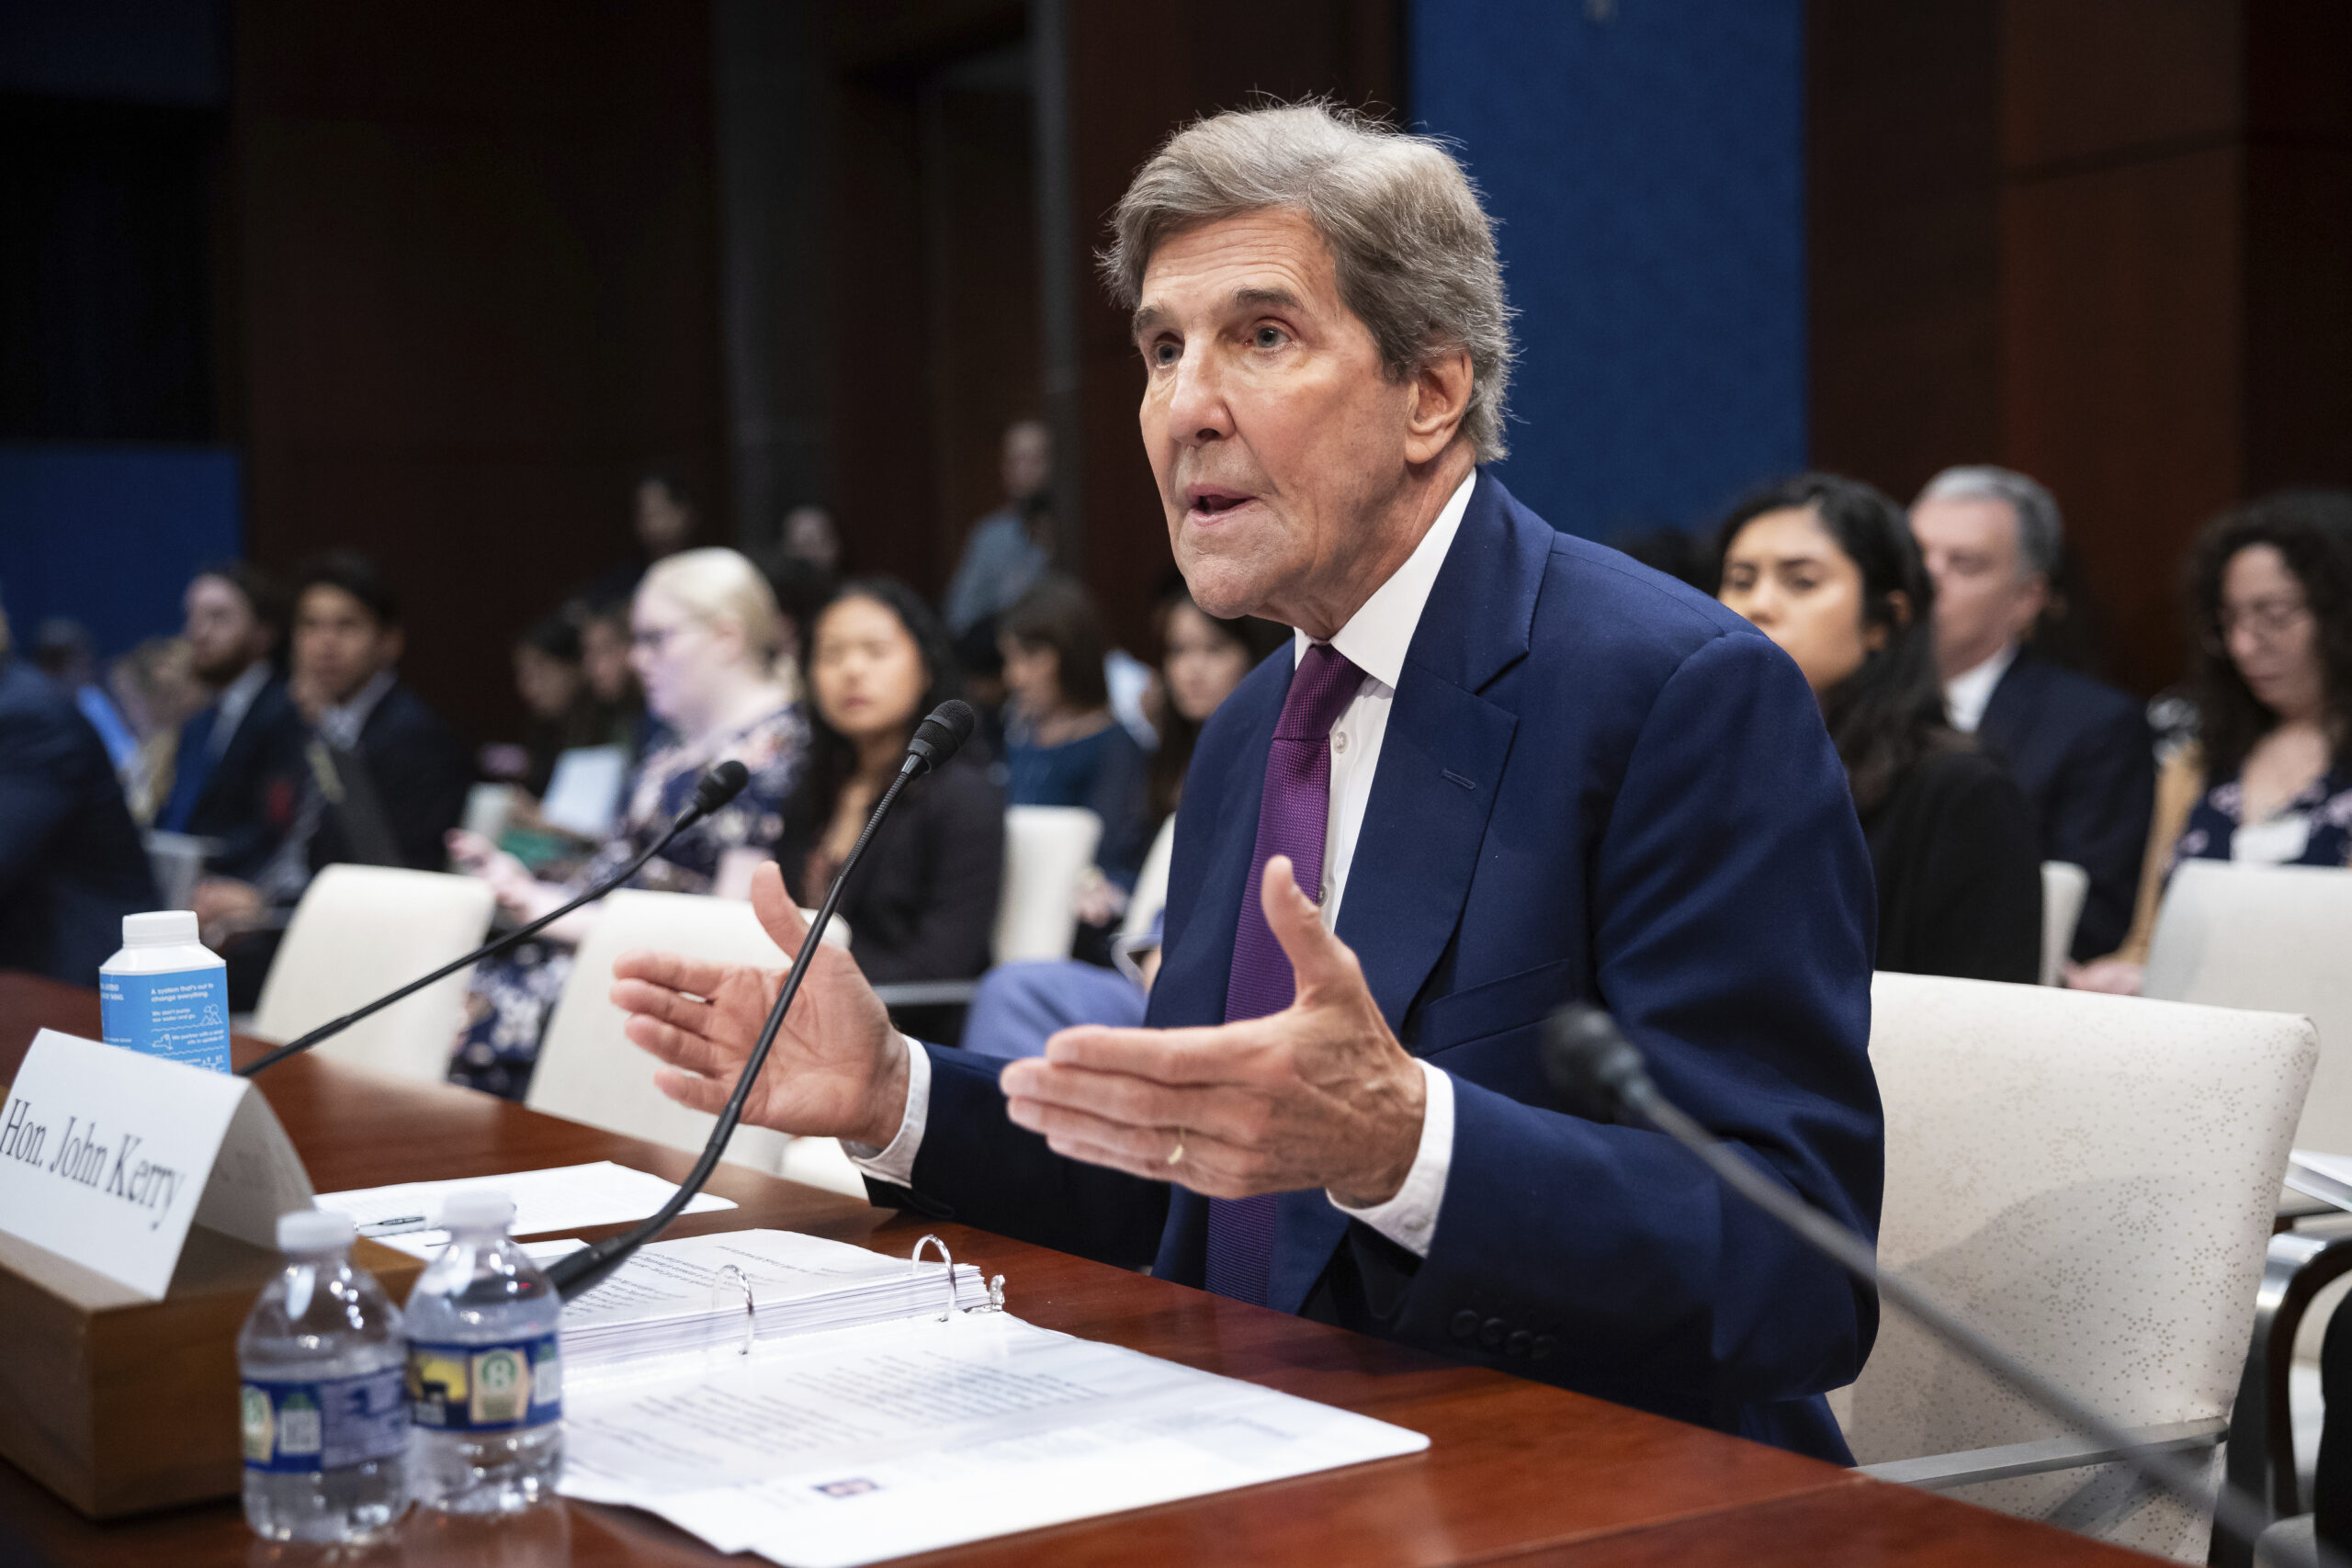 Kerry vows cooperation, not concessions, in climate talks with China